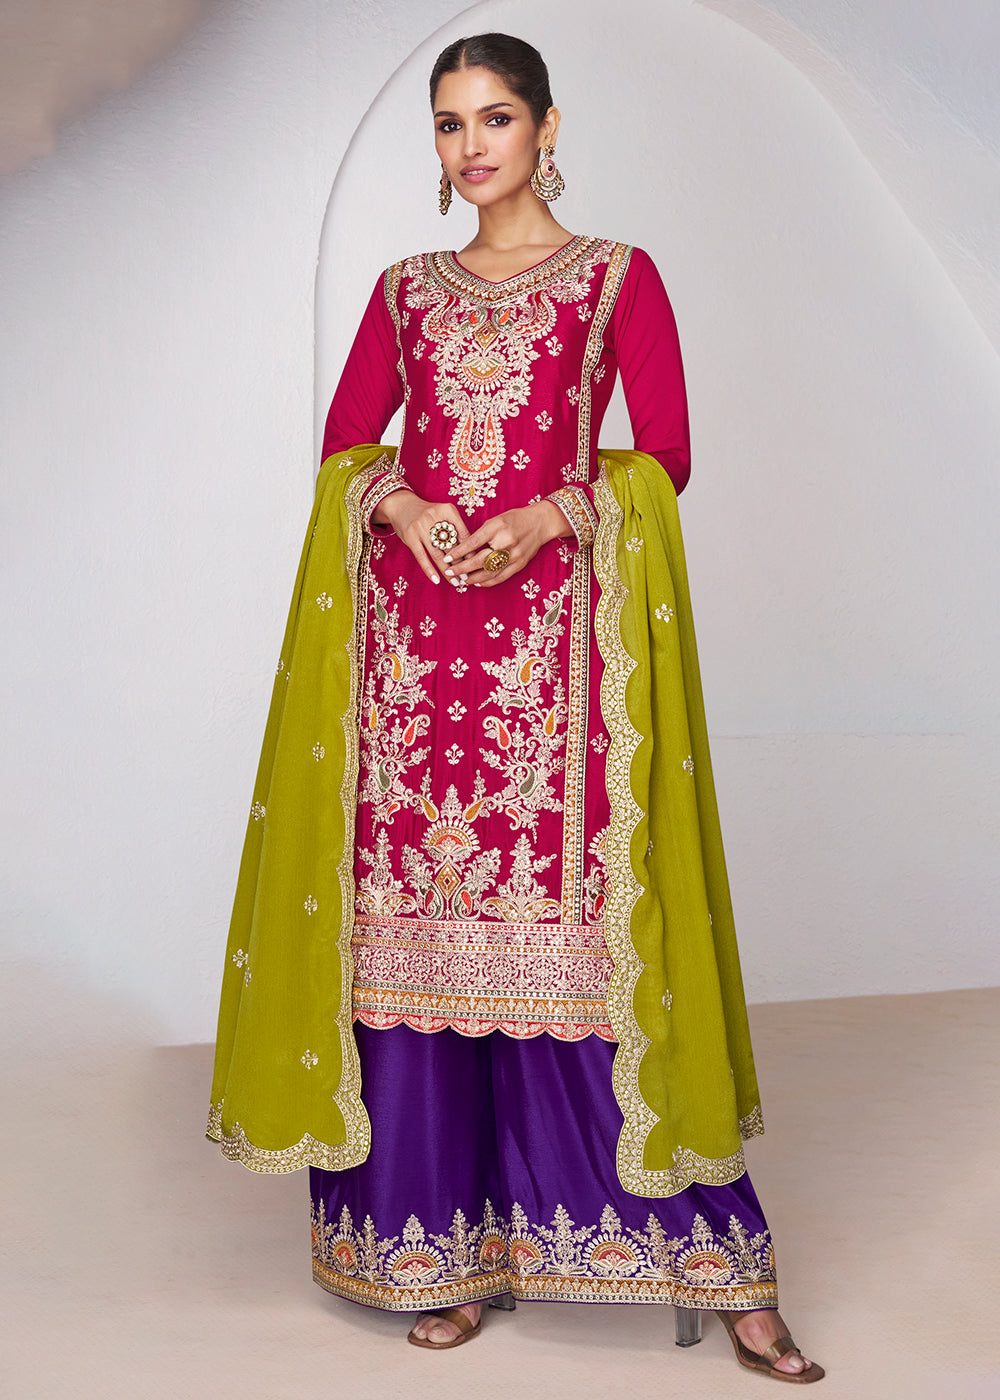 Buy Now Hot Pink & Purple Ceremonial Designer Palazzo Suit Online in USA, UK, Canada, Germany, Australia & Worldwide at Empress Clothing. 